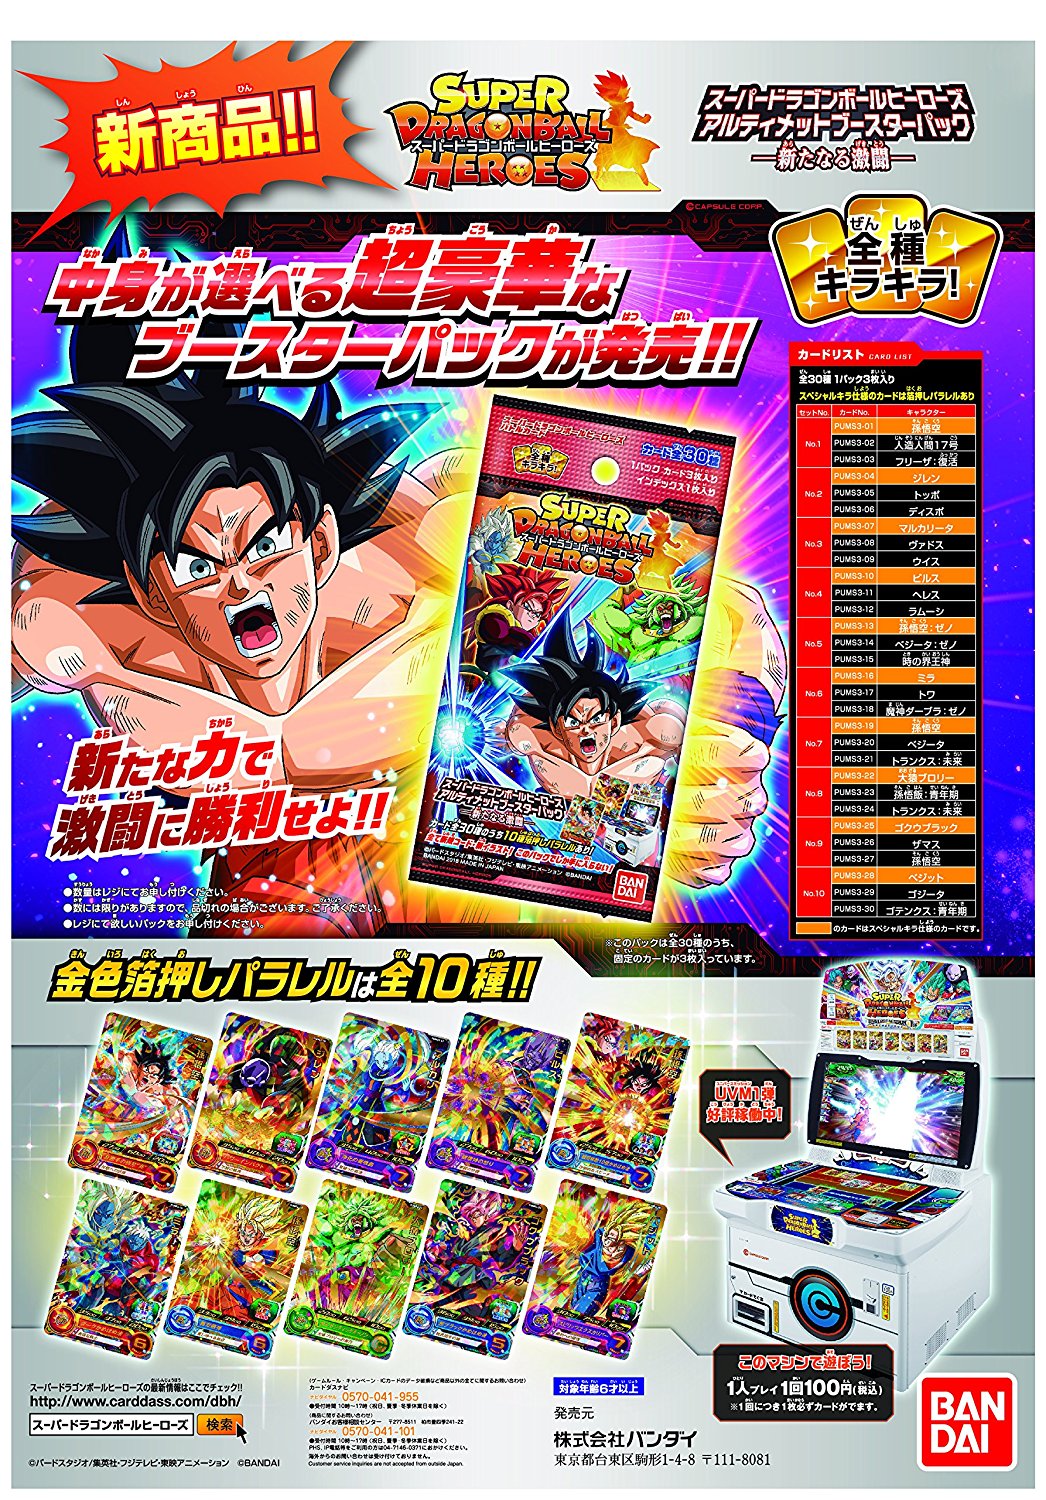 SUPER DRAGON BALL HEROES ULTIMATE BOOSTER PACK PUMS3 completo